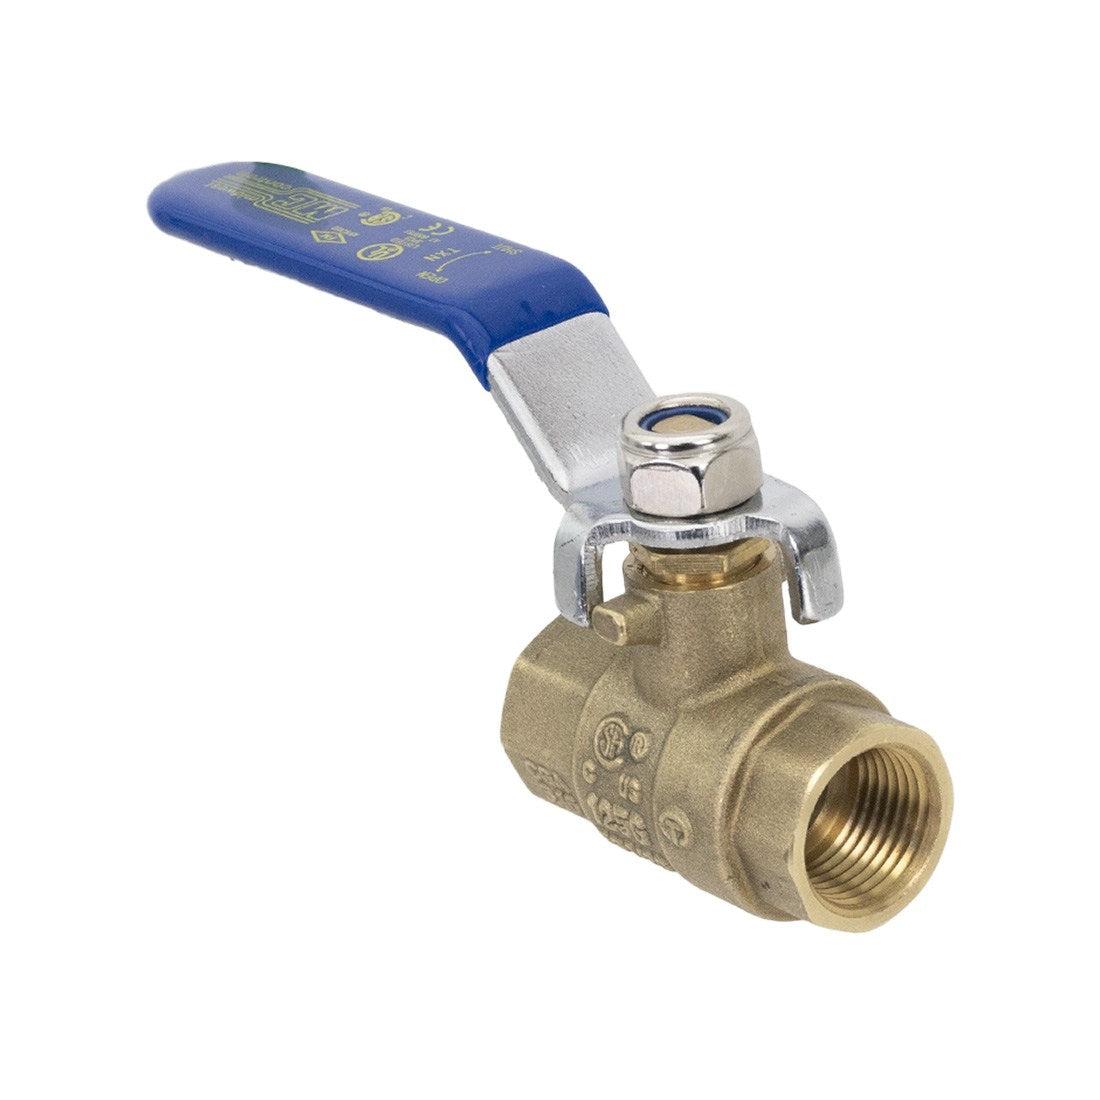 PWP Ball Valve 3/8 FPT 600psi Right Angle View